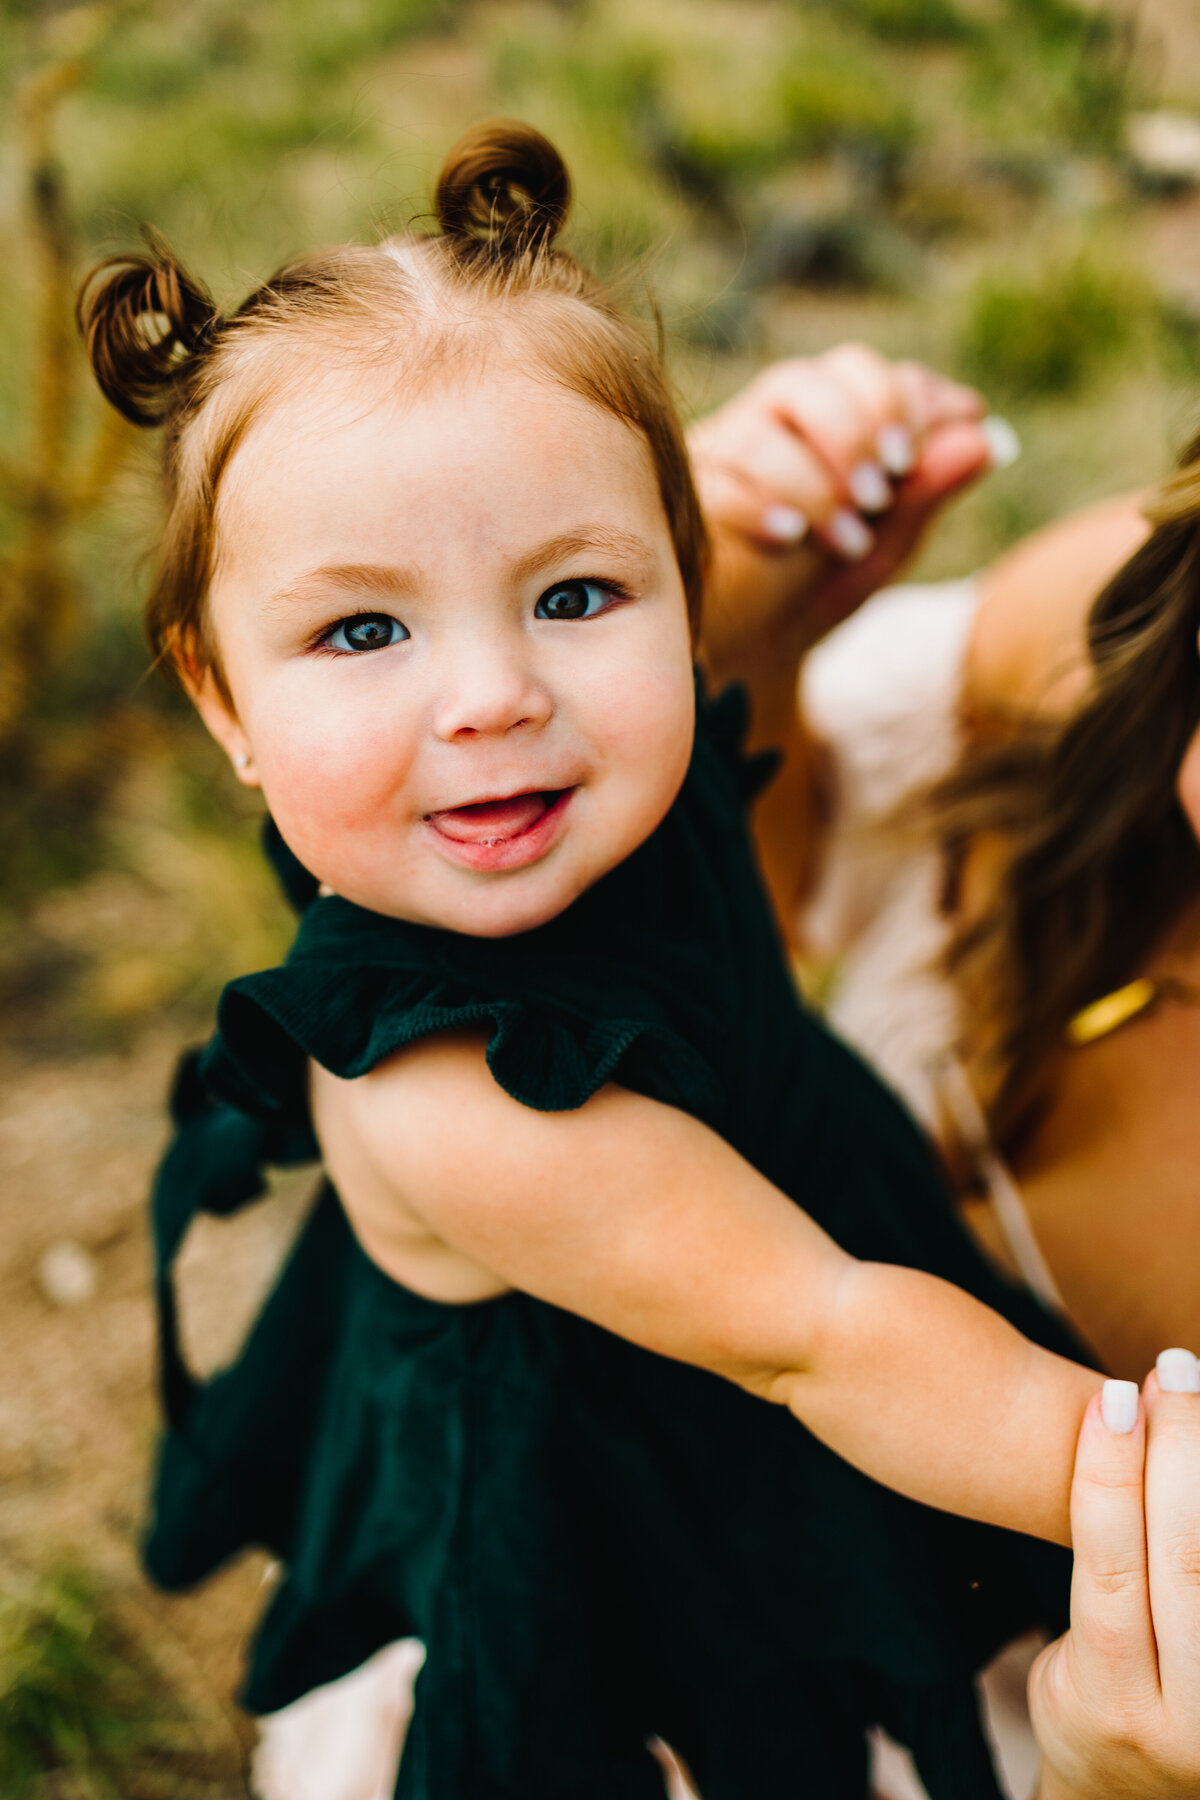 Photo of a baby watching the camera, she has a dark green dress and two tails in her hair. She is probing and is holding a woman's hand